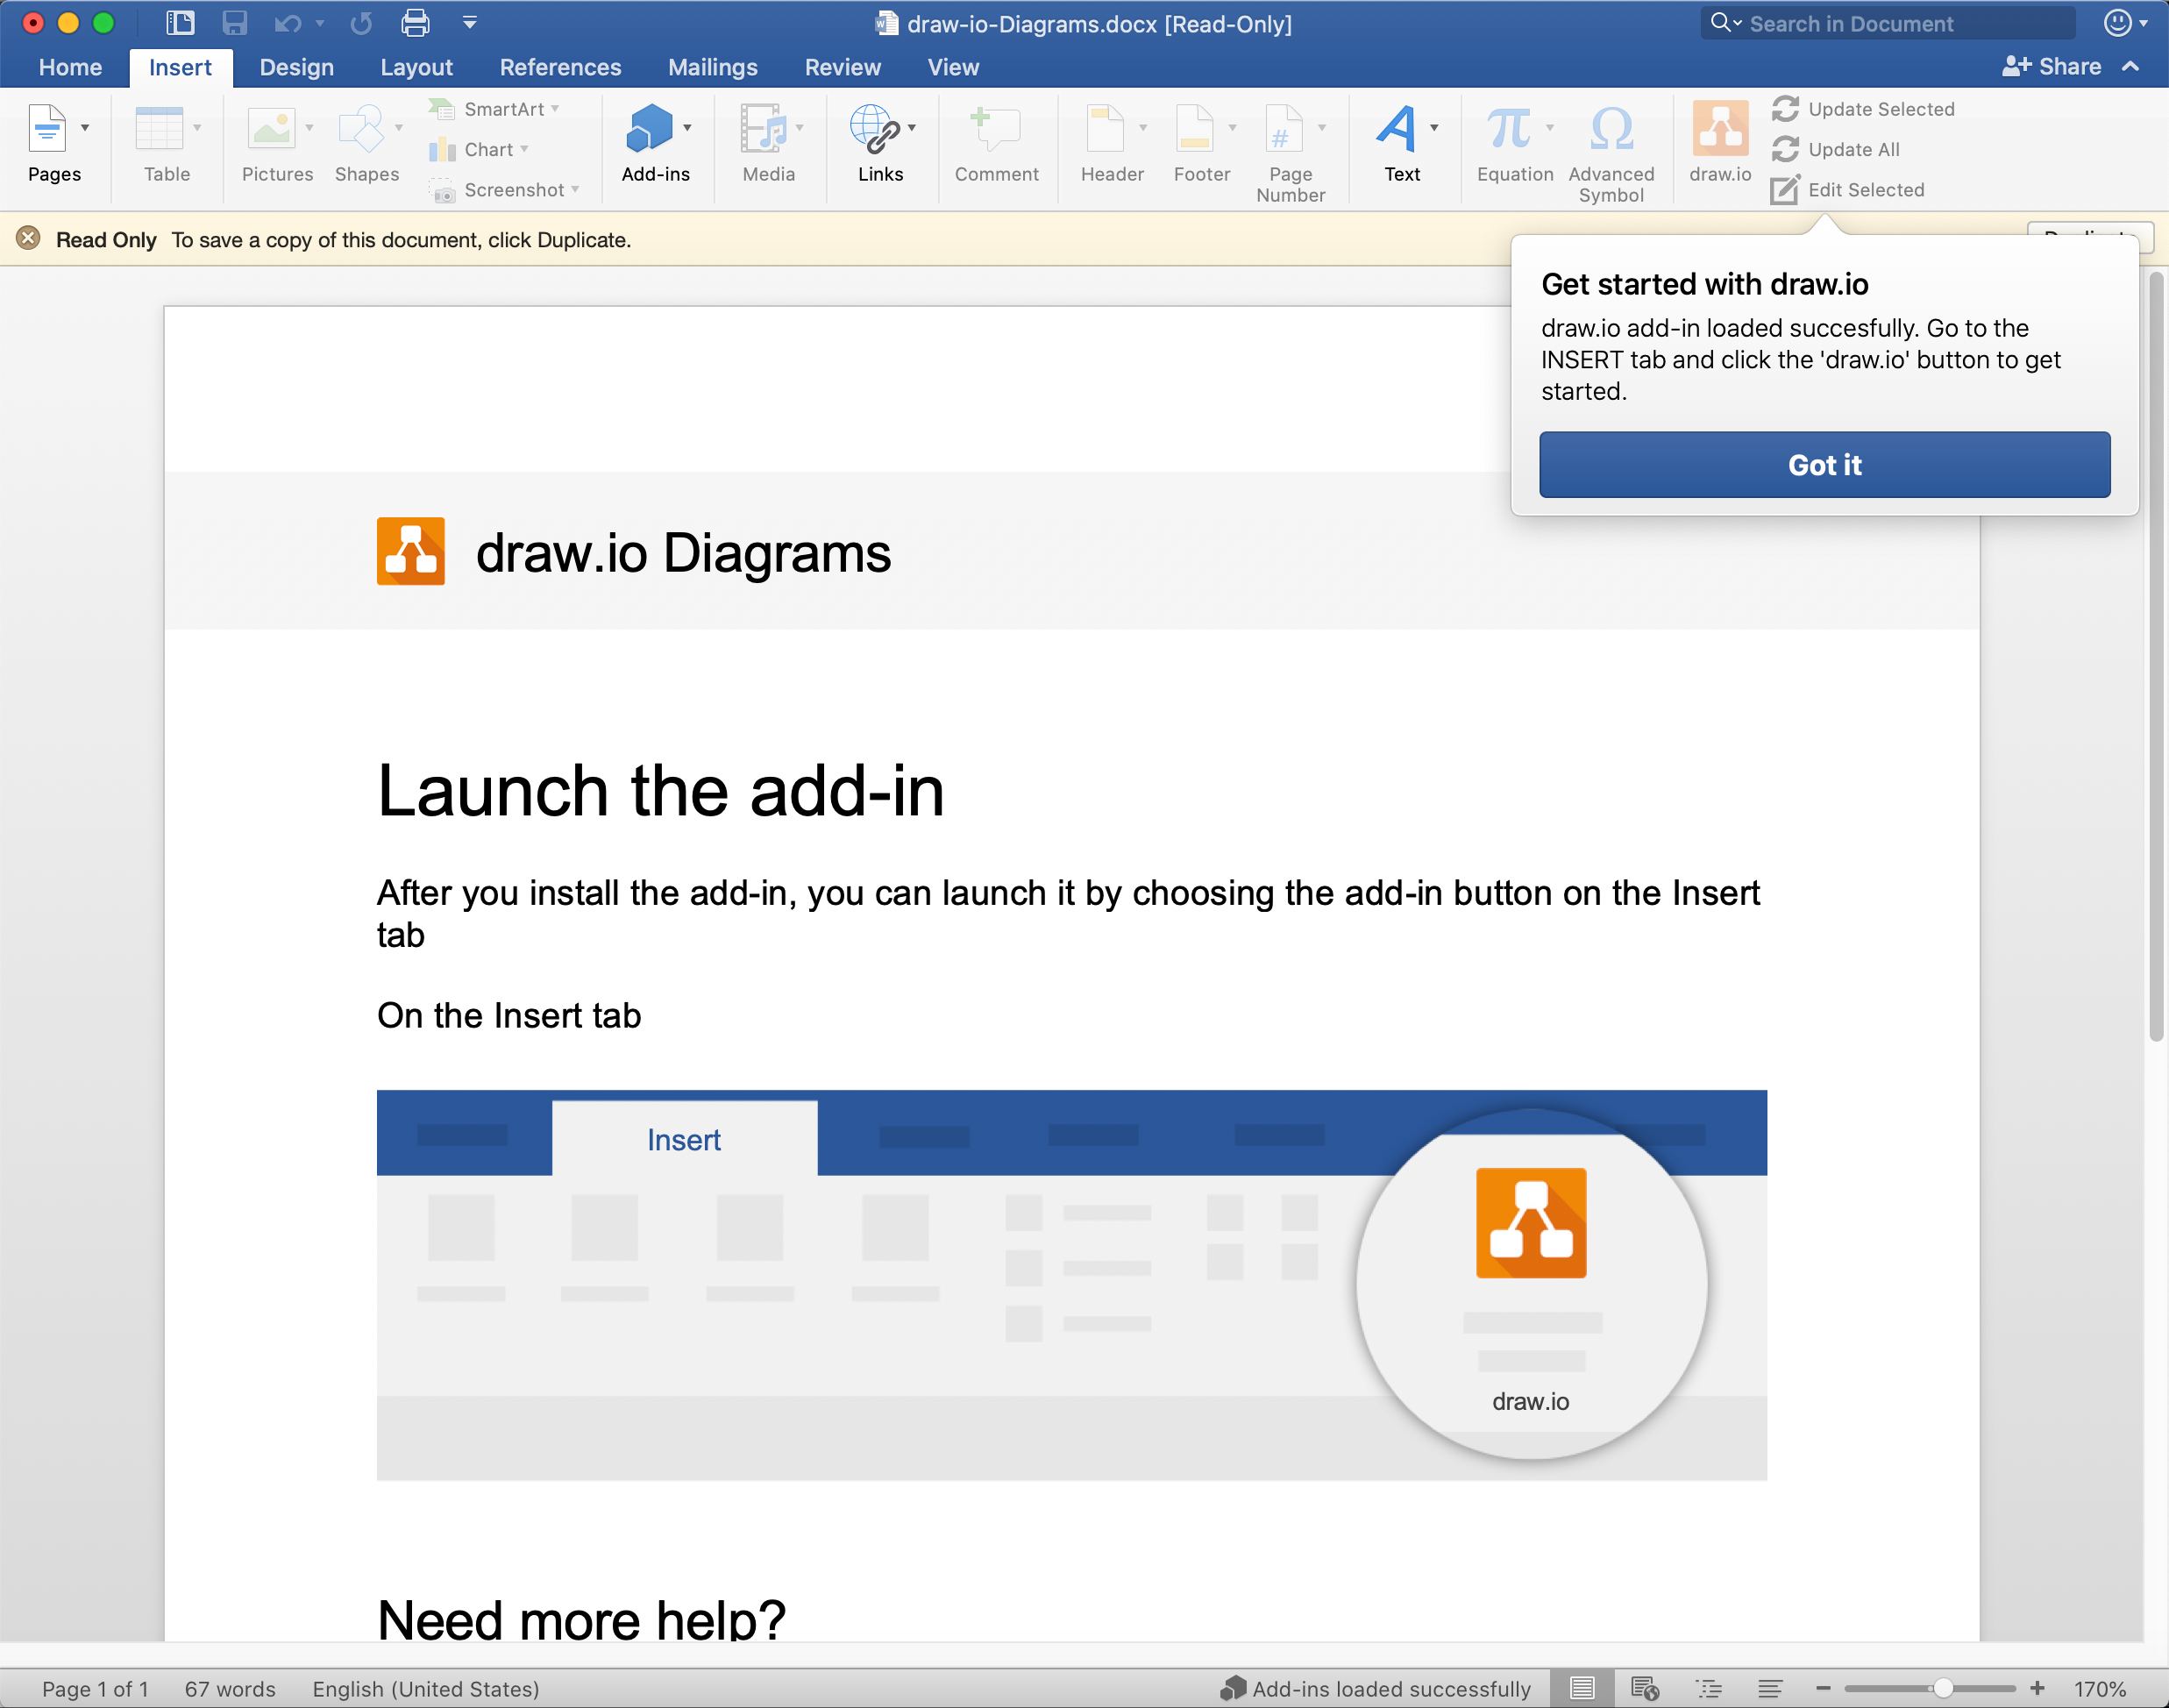 Learn how to use the draw.io add-in in your Microsoft product